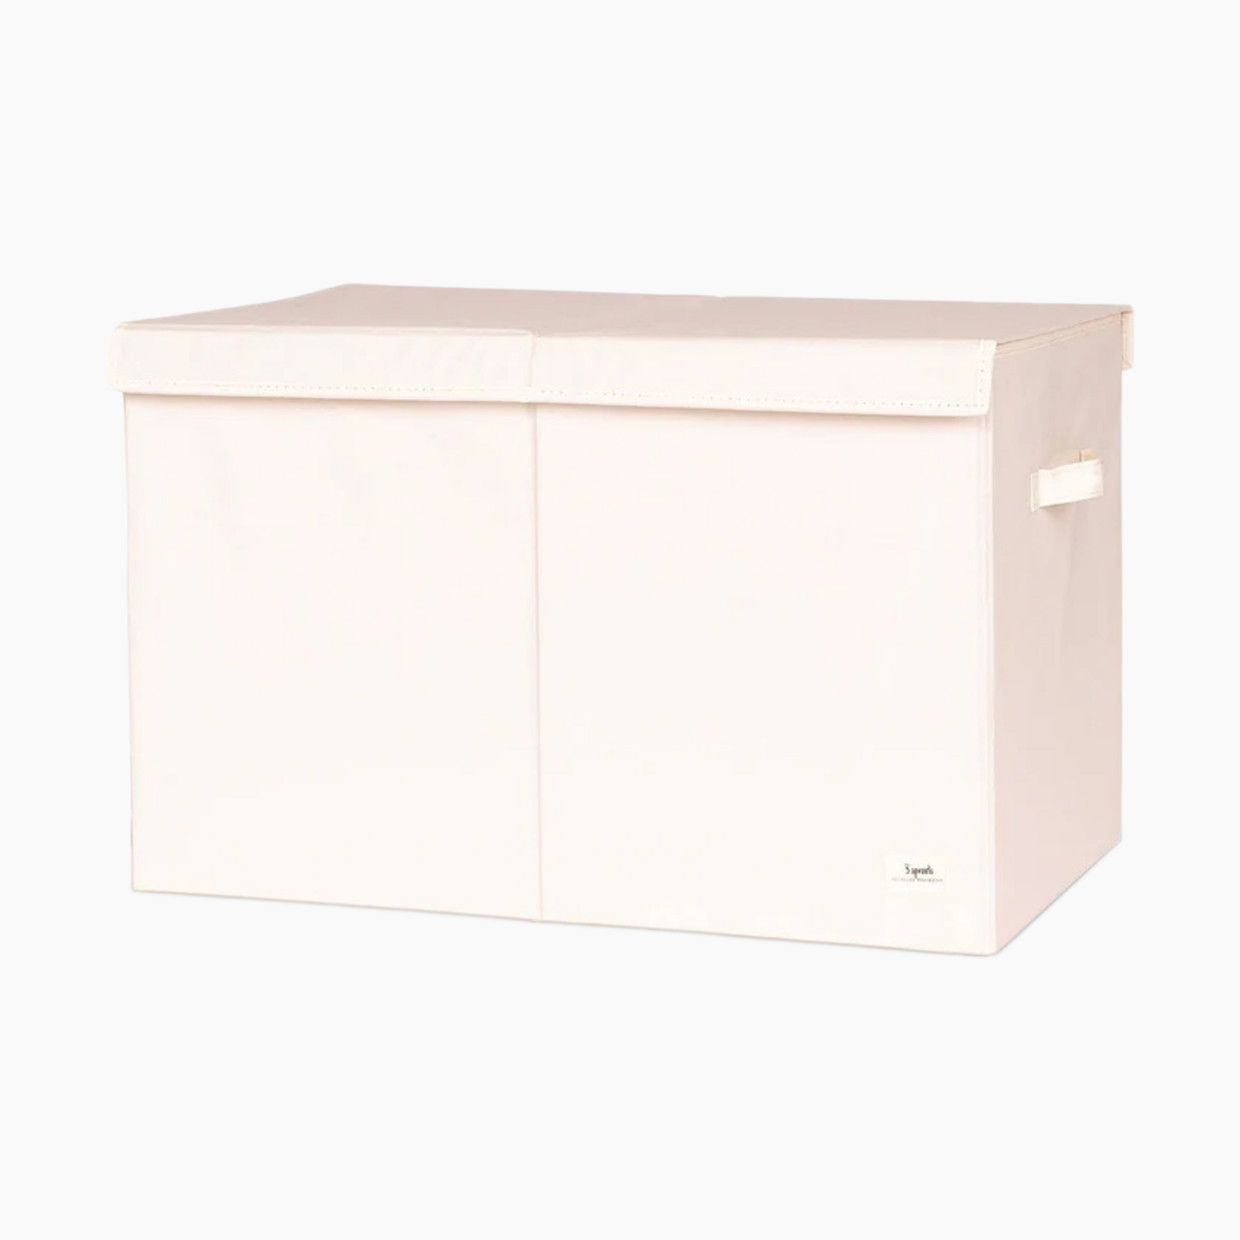 3 Sprouts Recycled Folding Toy Chest - Cream.